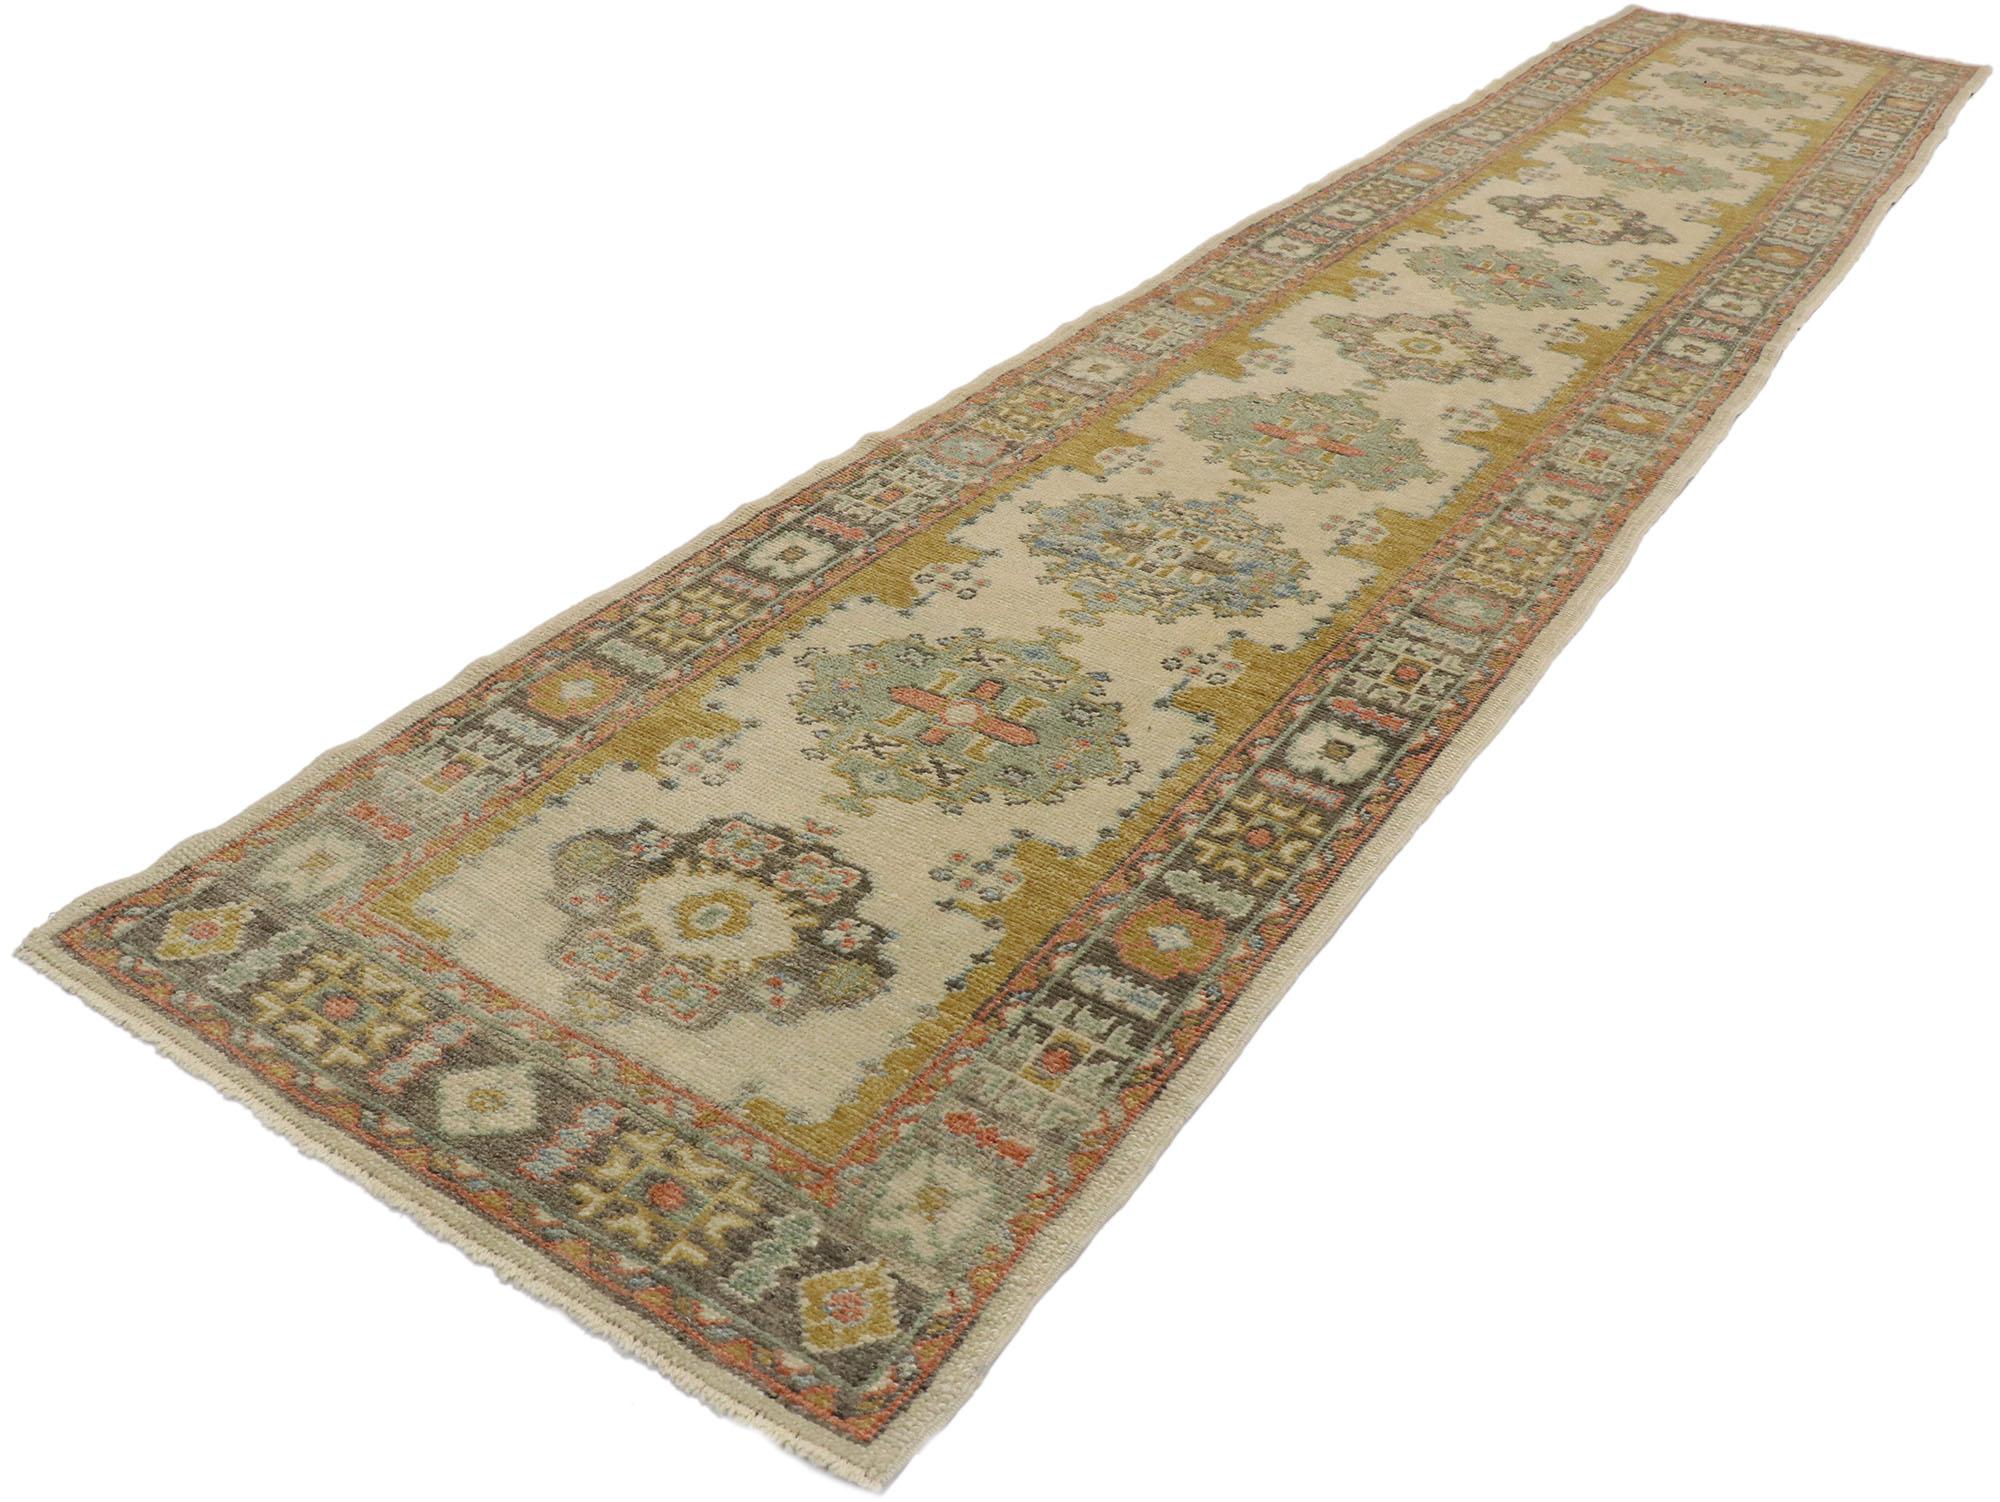 53378, new contemporary Turkish Oushak Runner with Transitional Modern style. Displaying architectural elements of naturalistic forms in warm earth-tone colors with decorative elegance, this hand knotted wool contemporary Turkish Oushak runner